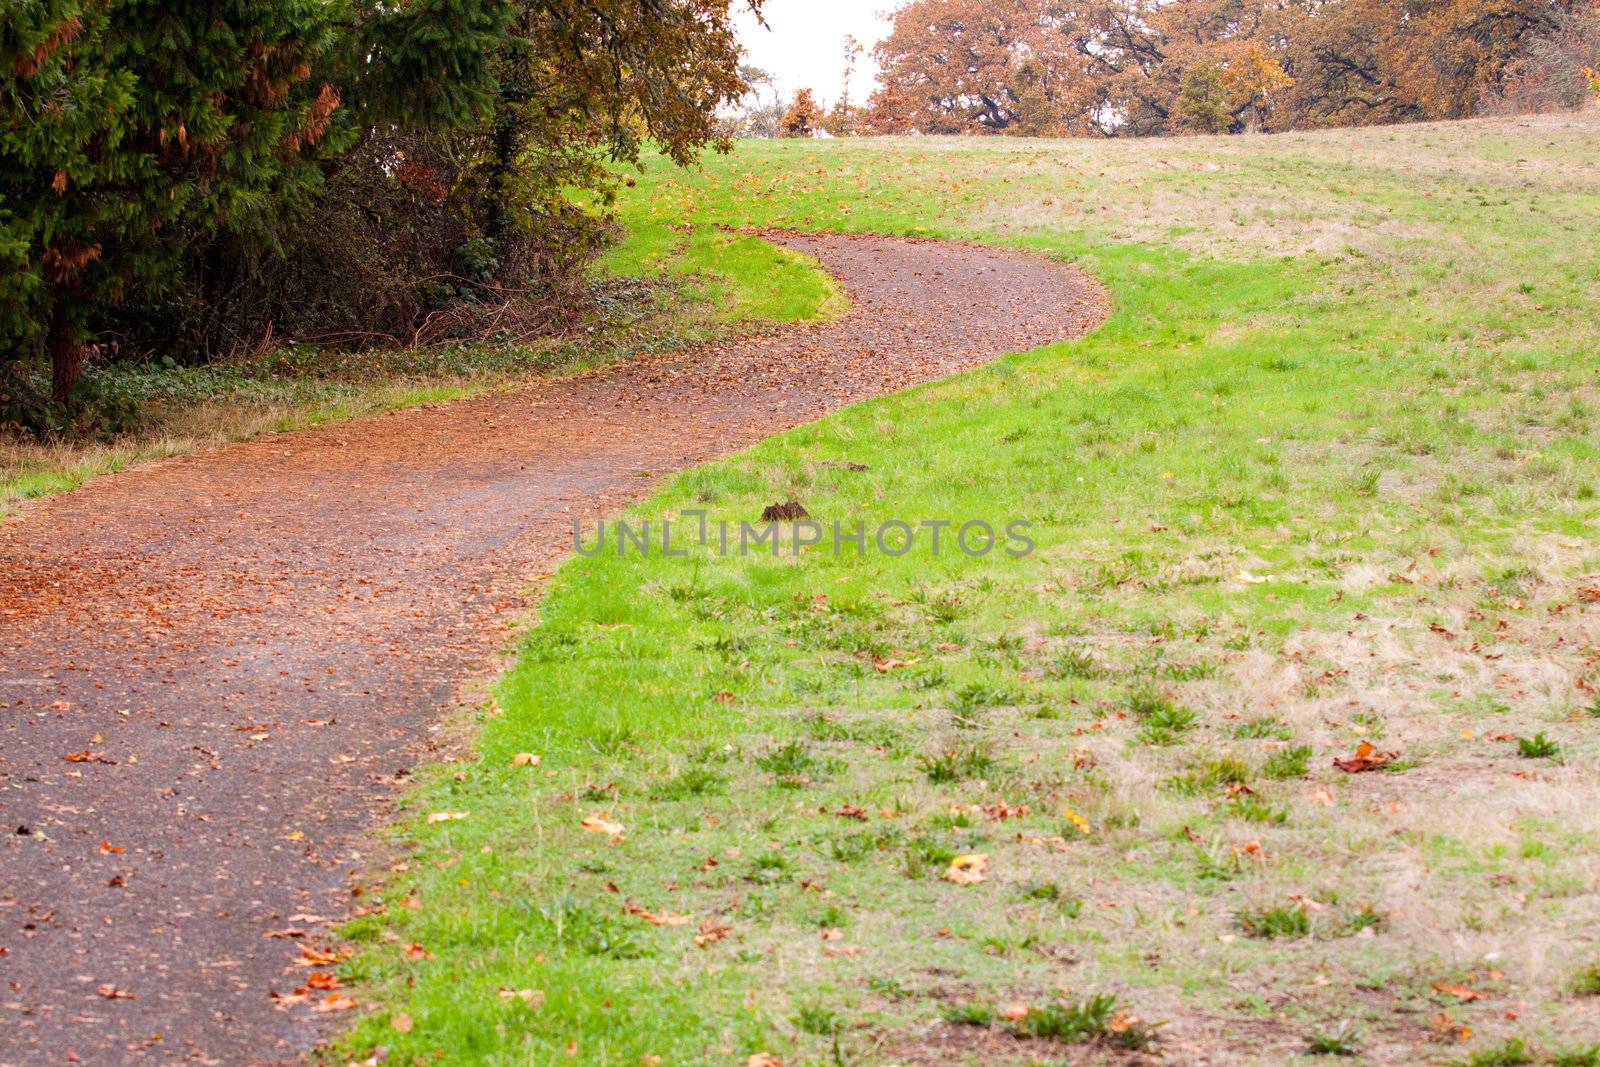 Leaves cover the ground along a curving road during the season of Autumn or Fall.